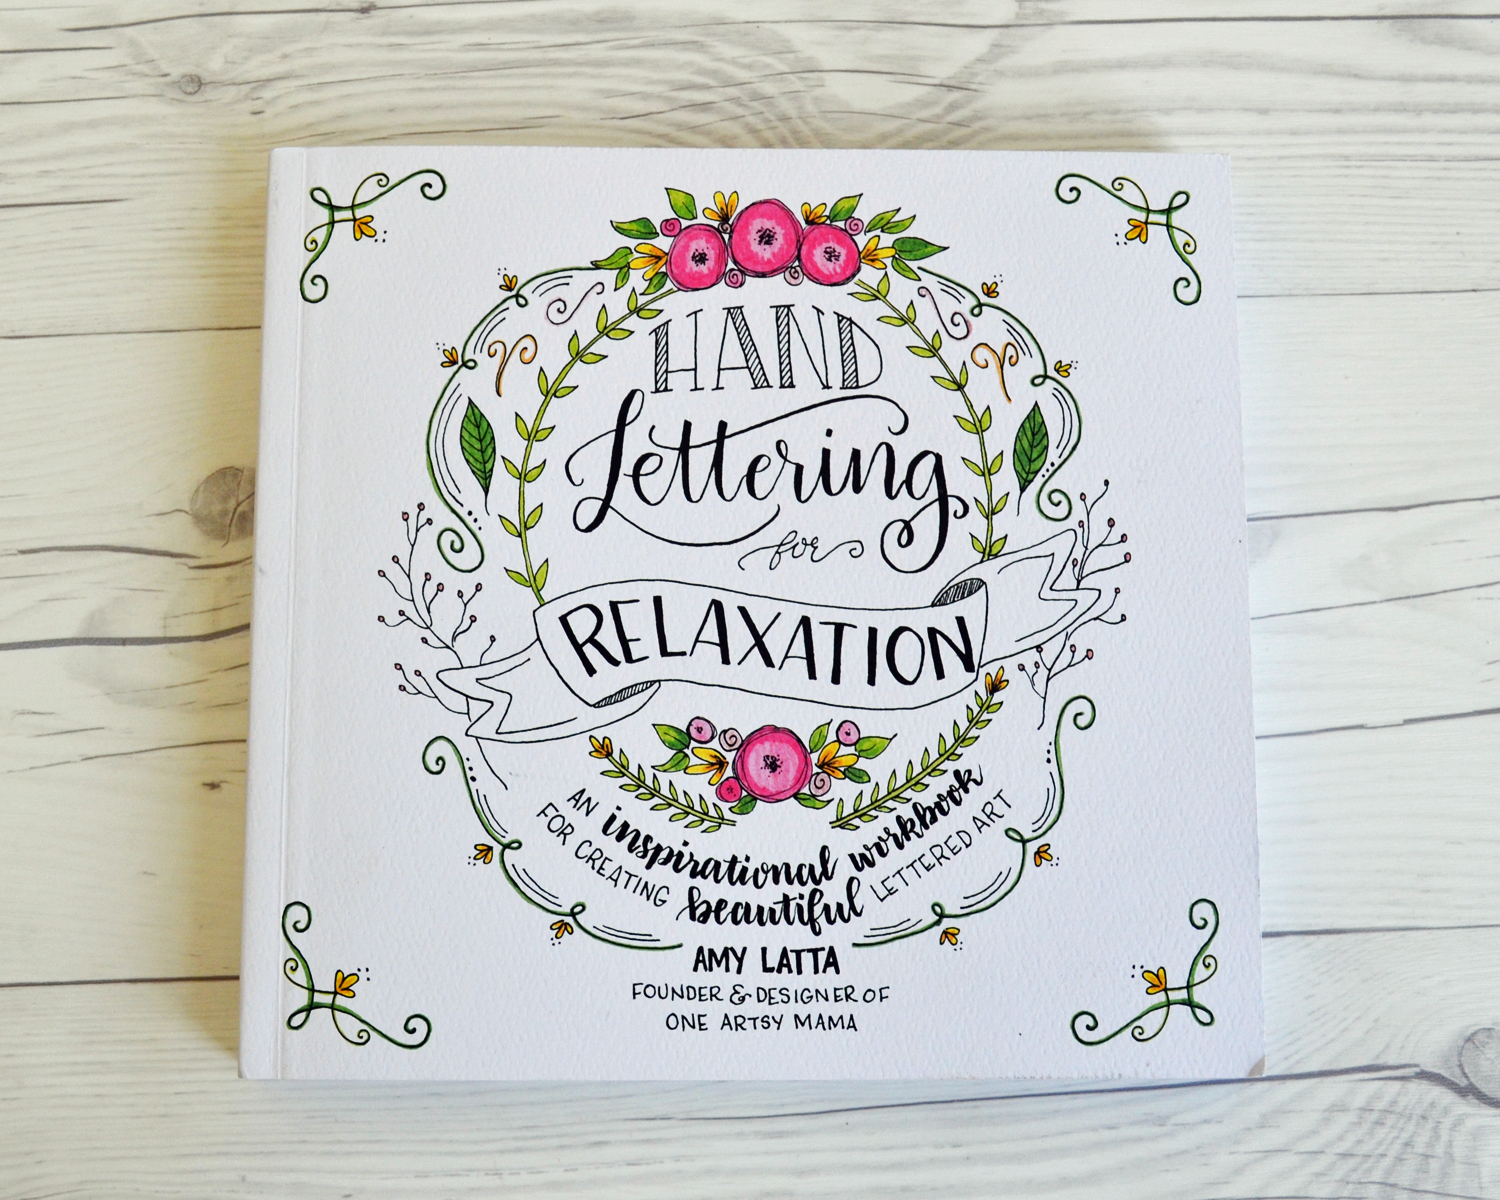 Hand Lettering for Relaxation by Amy Latta